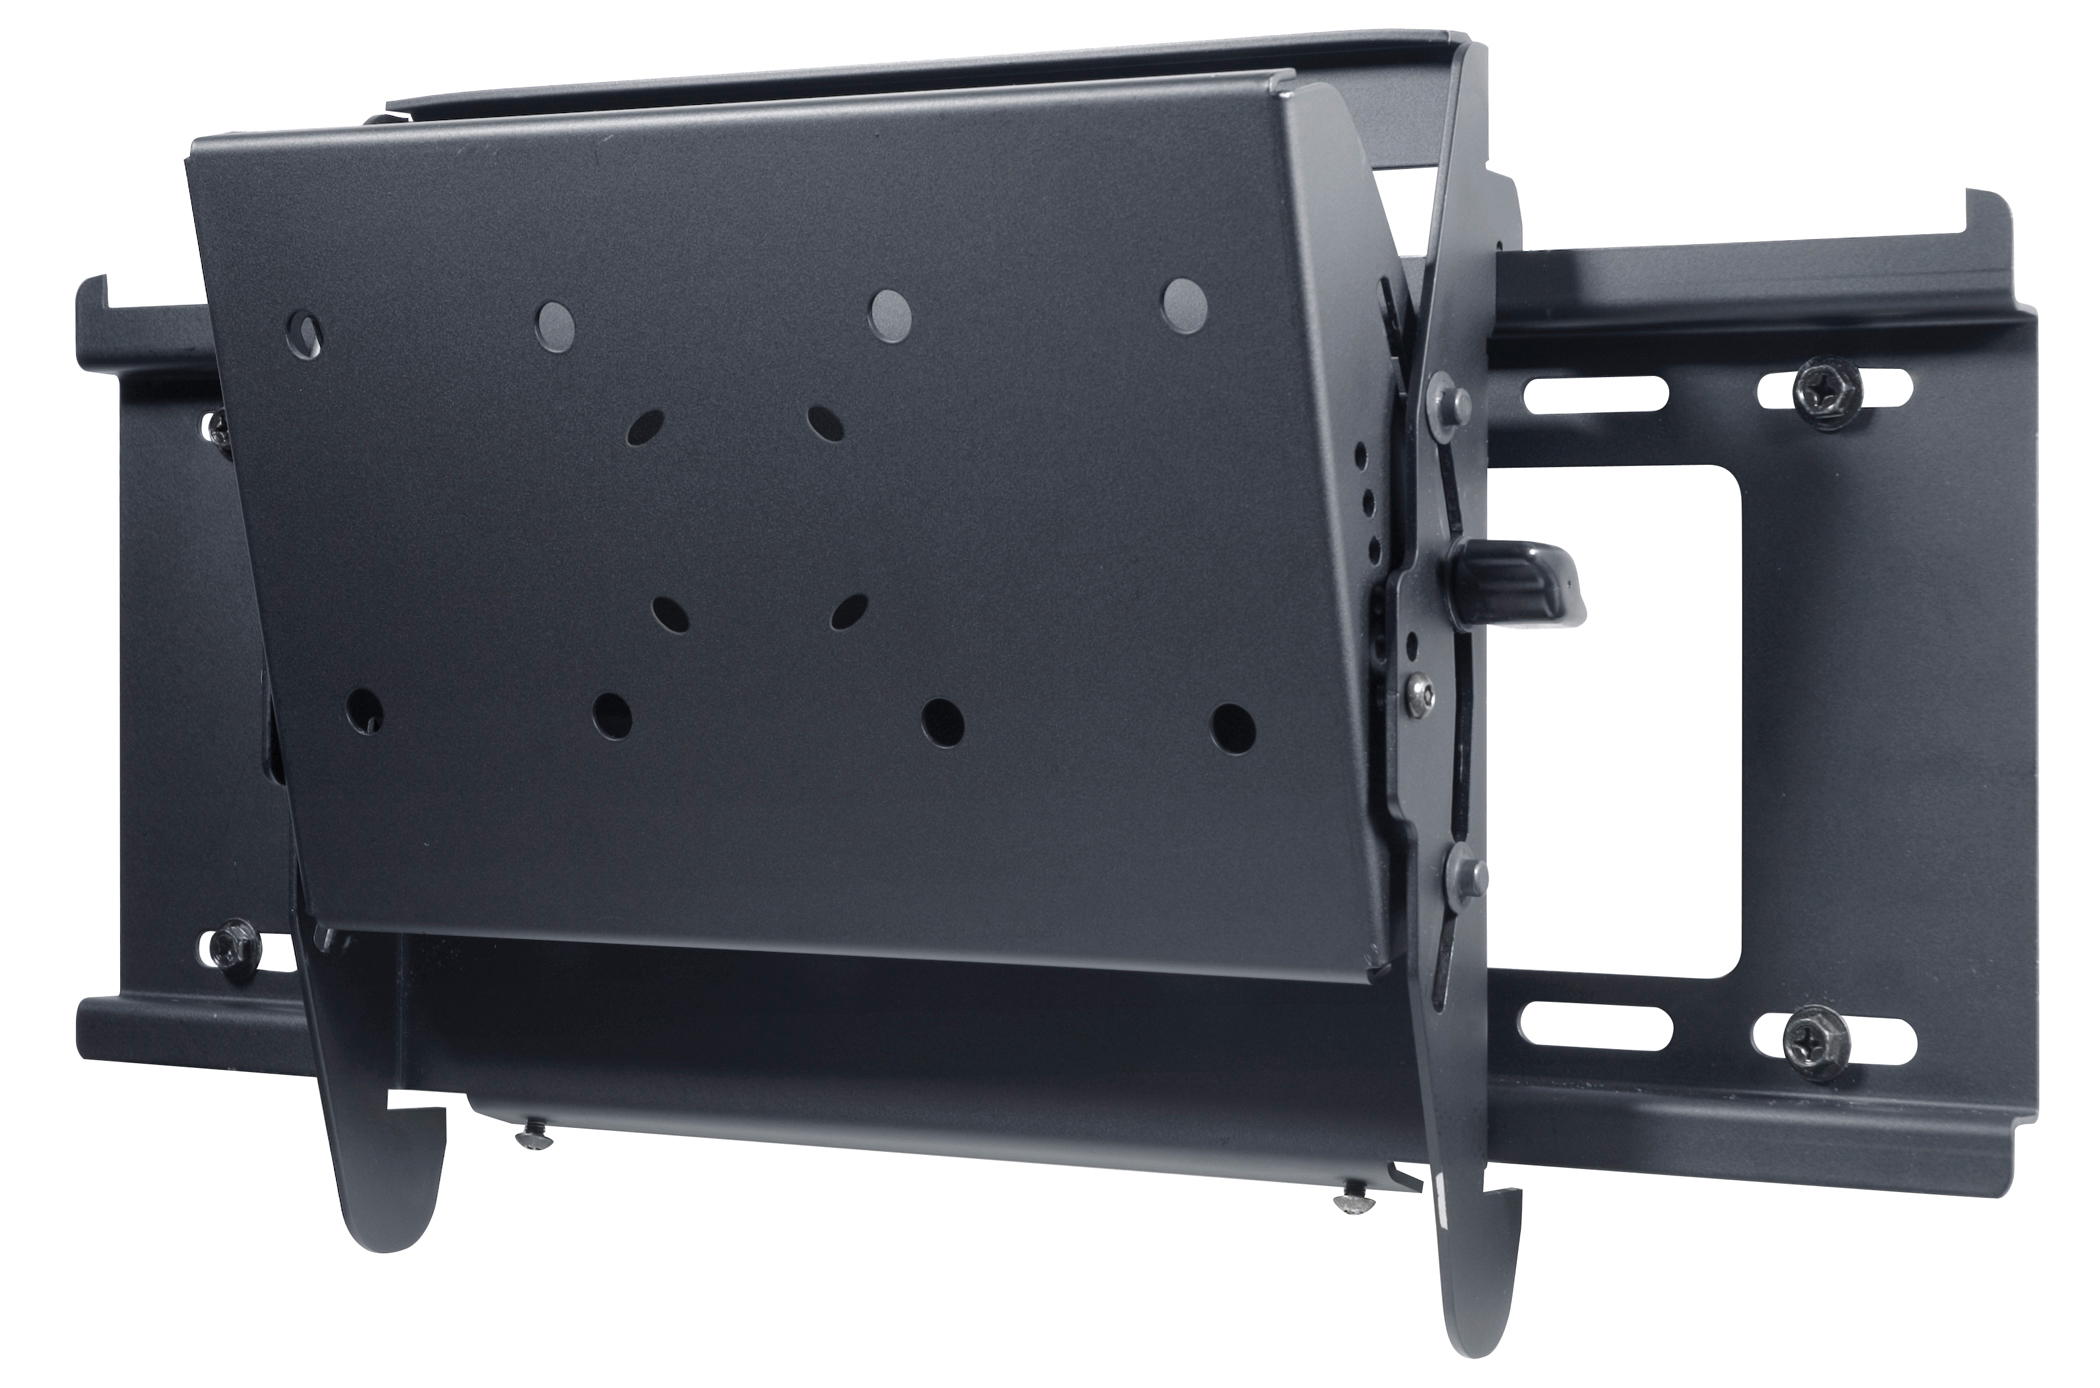 ST16D SmartMount Display-Specific Tilt Wall Mount for up to 71" Displays